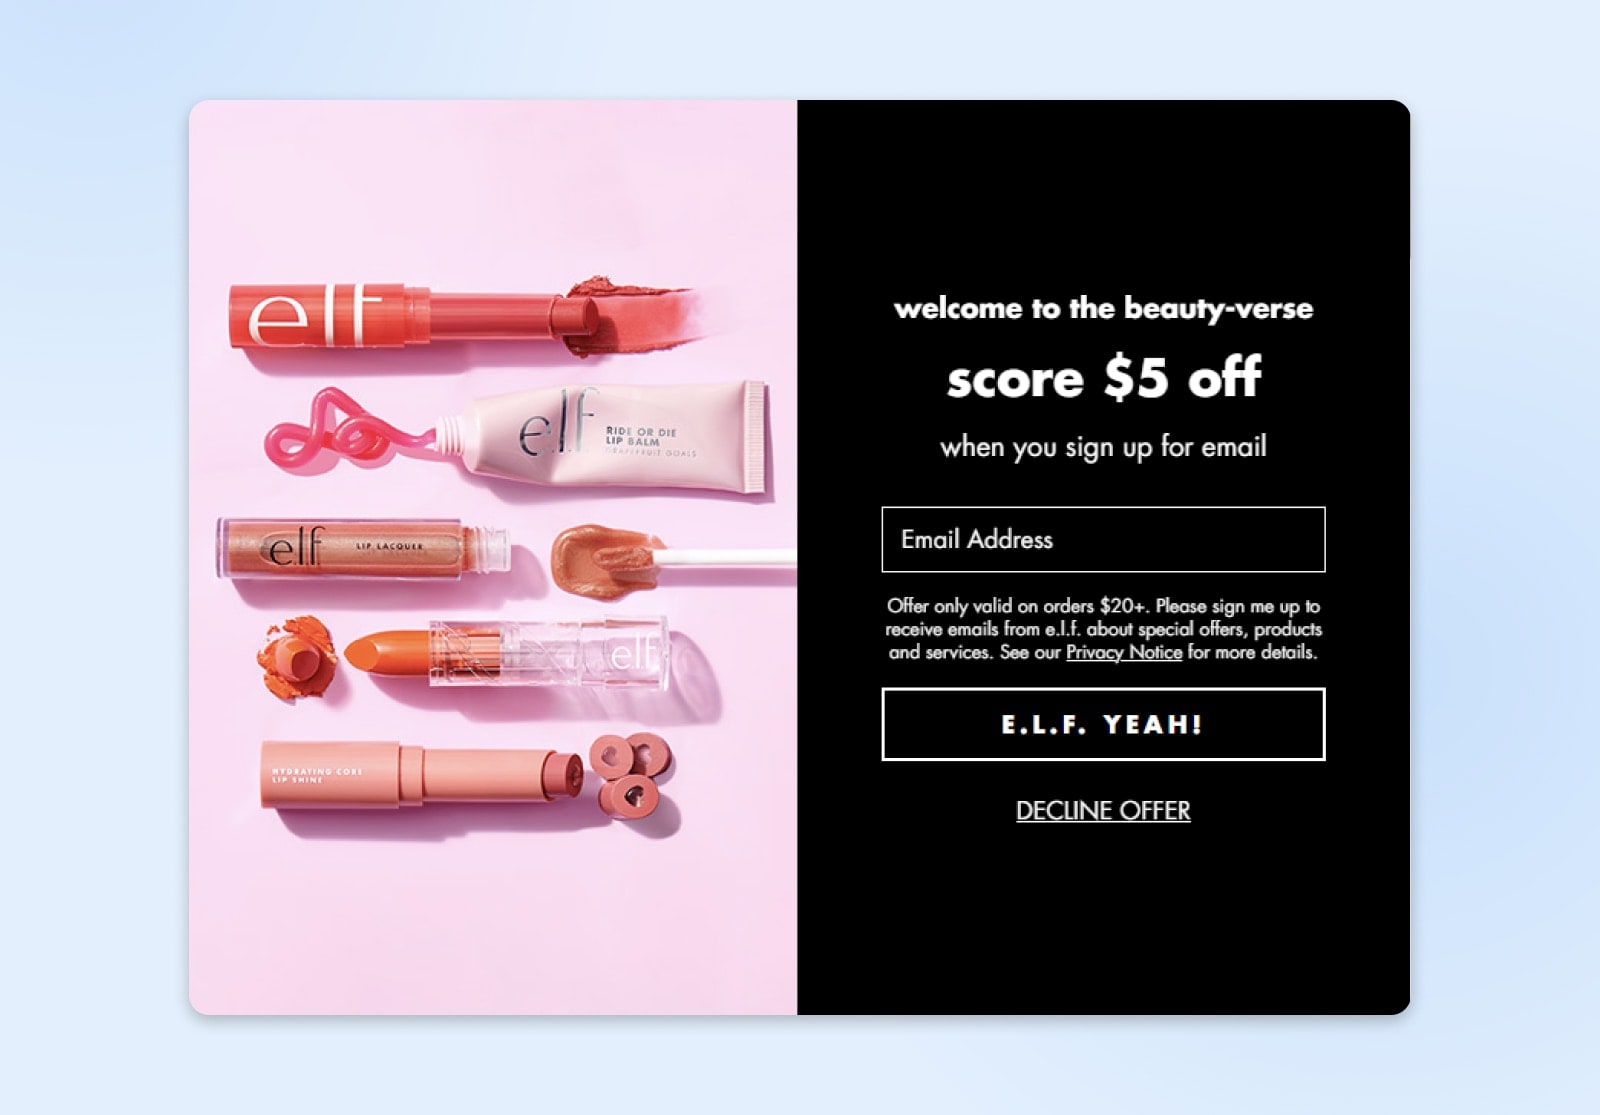 example of a pop up when you shop on e.l.f. offering $5 off a purchase when you sign up 